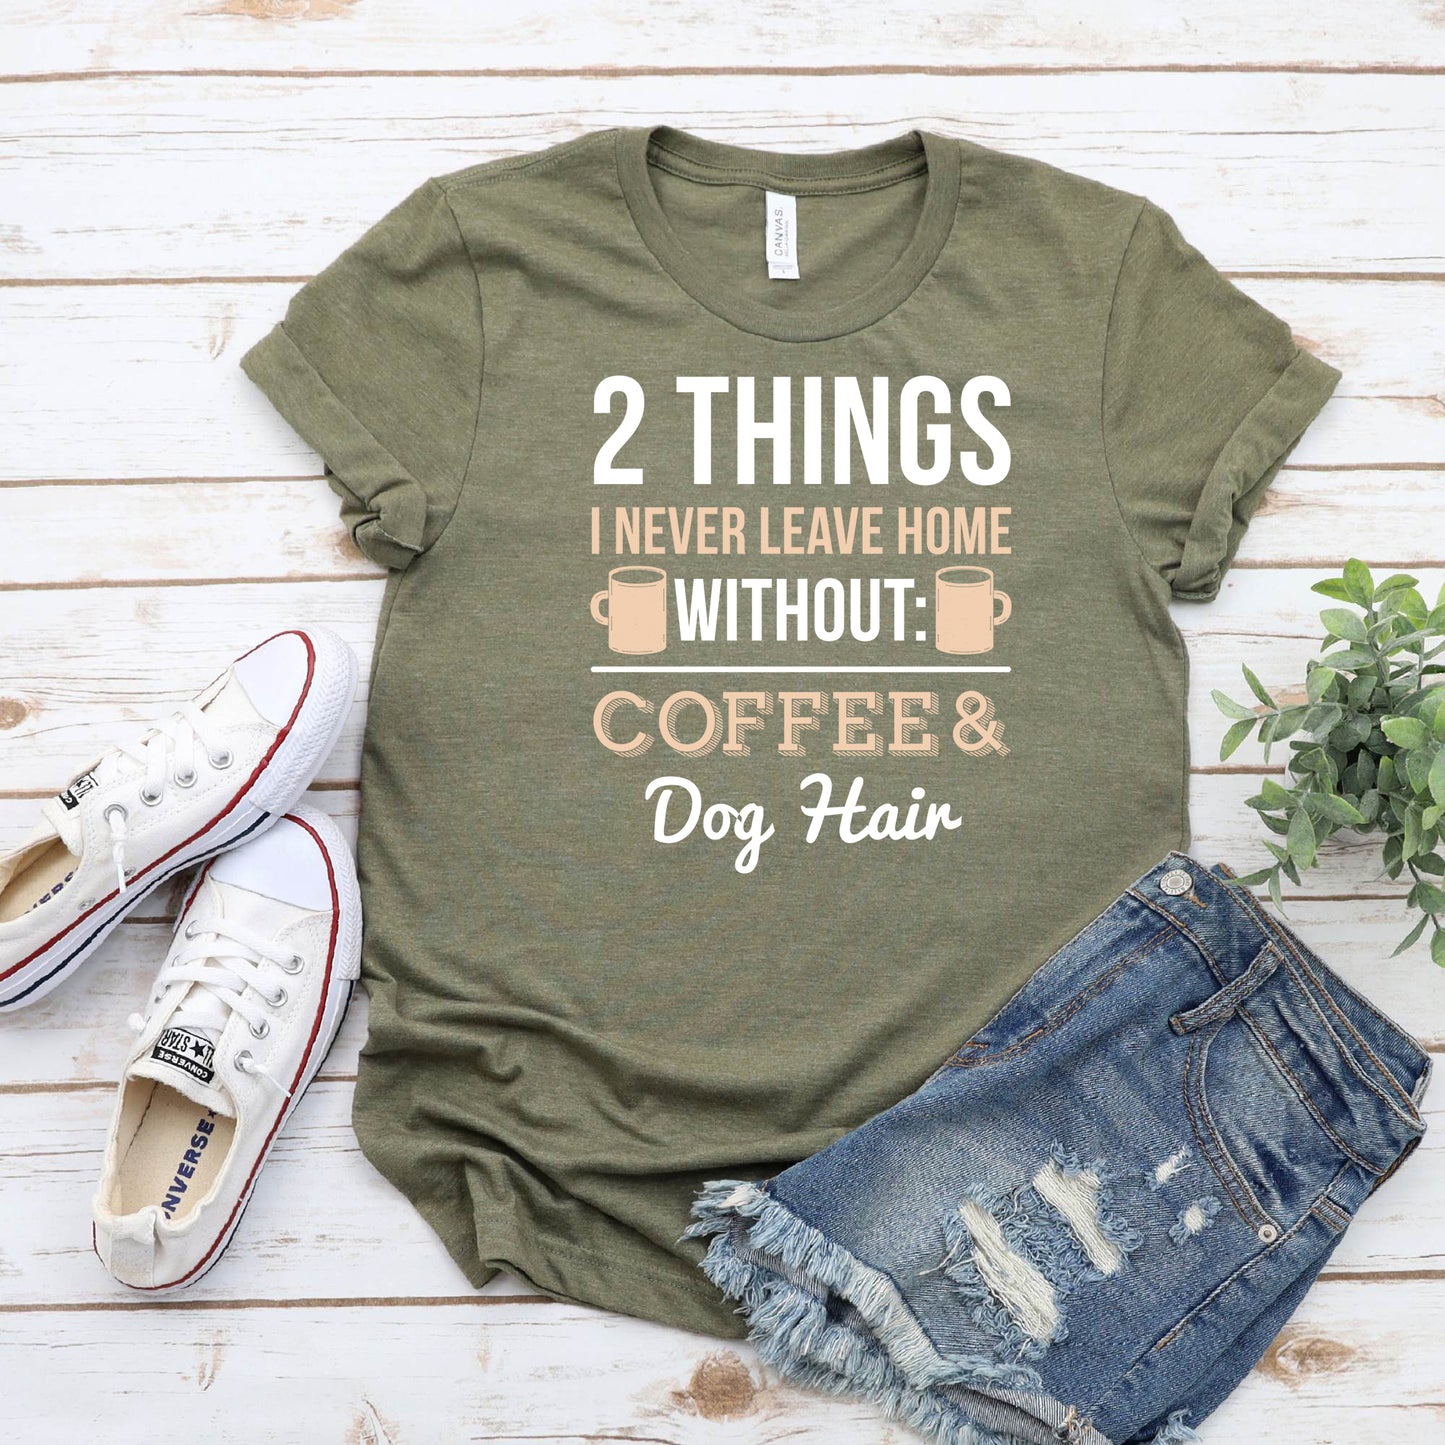 Funny Coffee & Dog Hair Graphic T-Shirt - PuppyJo T-Shirt Olive / S